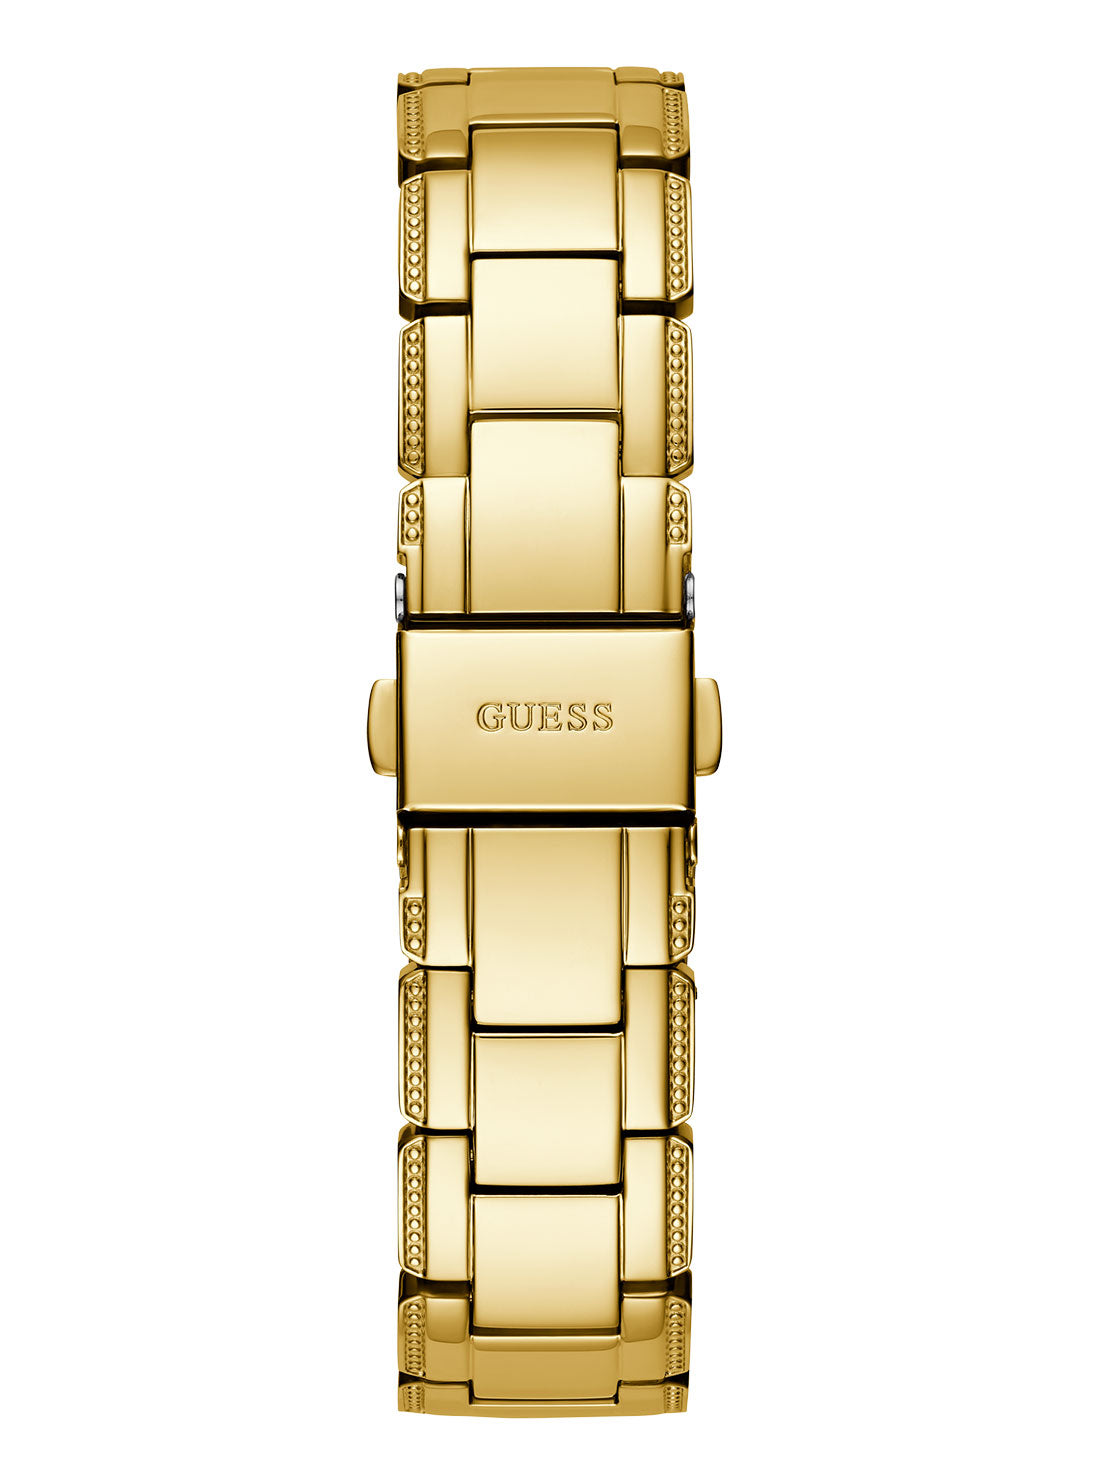 GUESS Women's Champagne Crystal Clear Glitz Watch GW0470L2 Back View